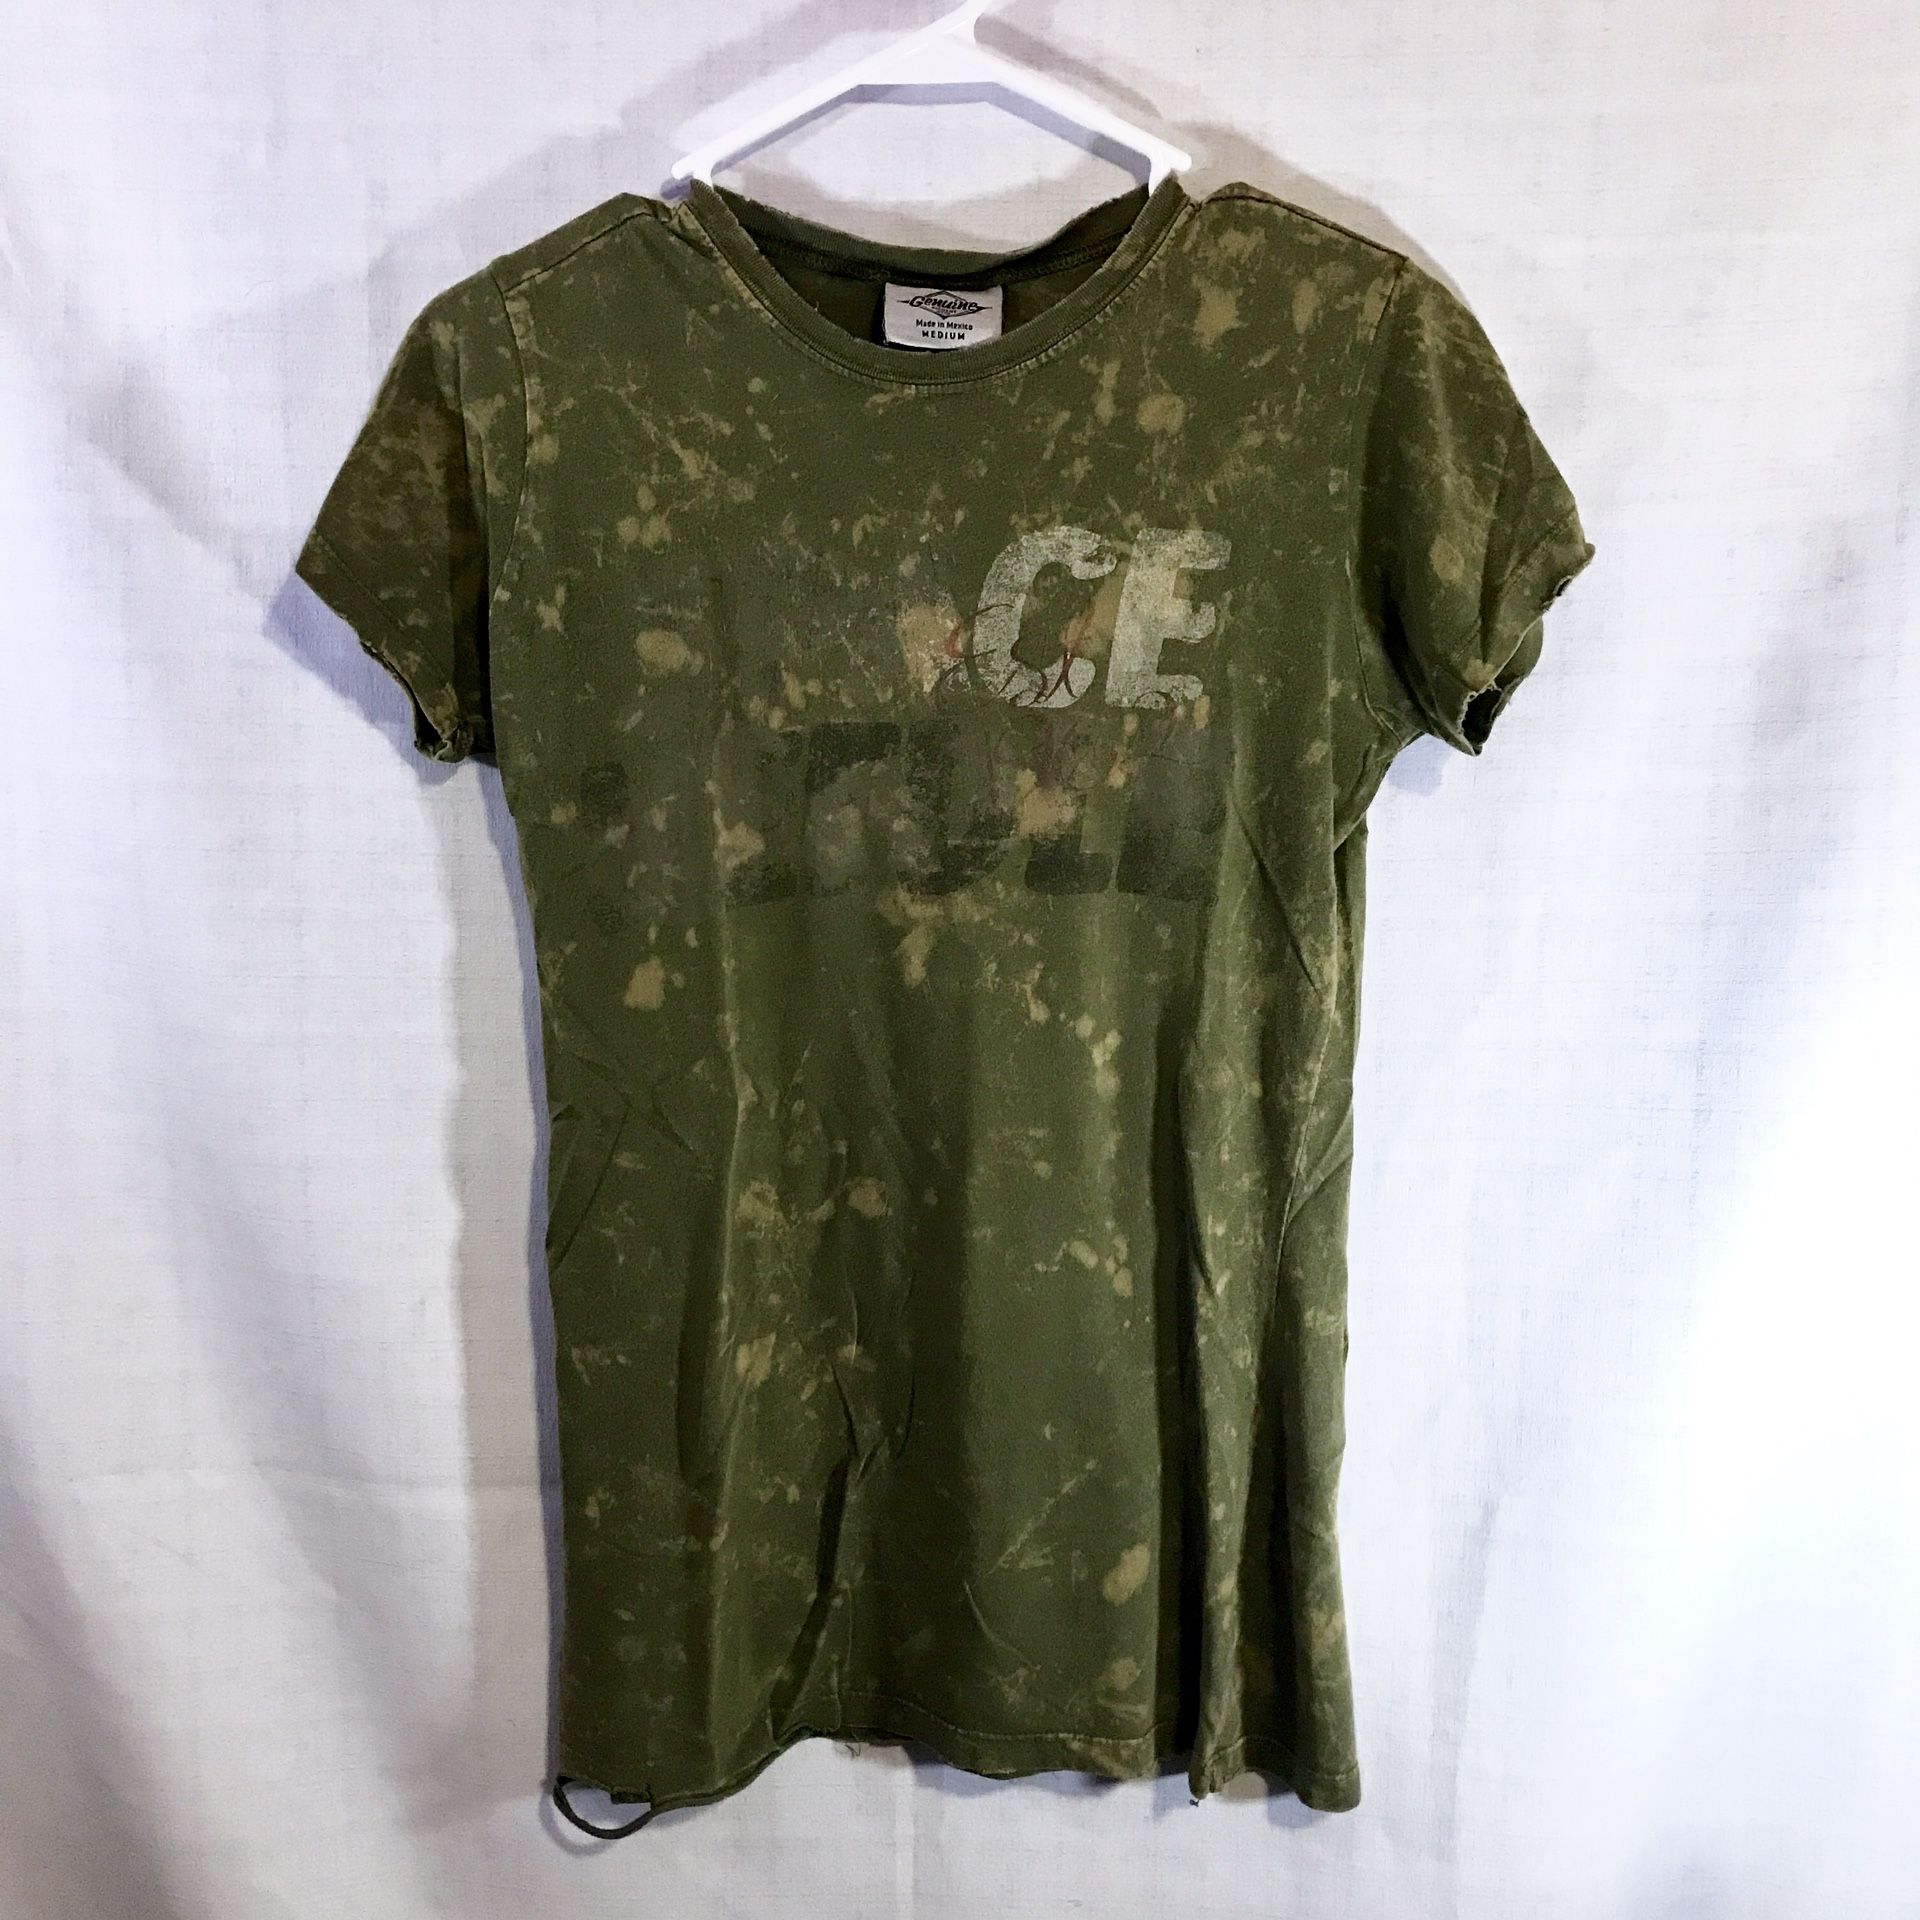 “Space Needle” Green Camo Short Sleeve T-Shirt, Size M